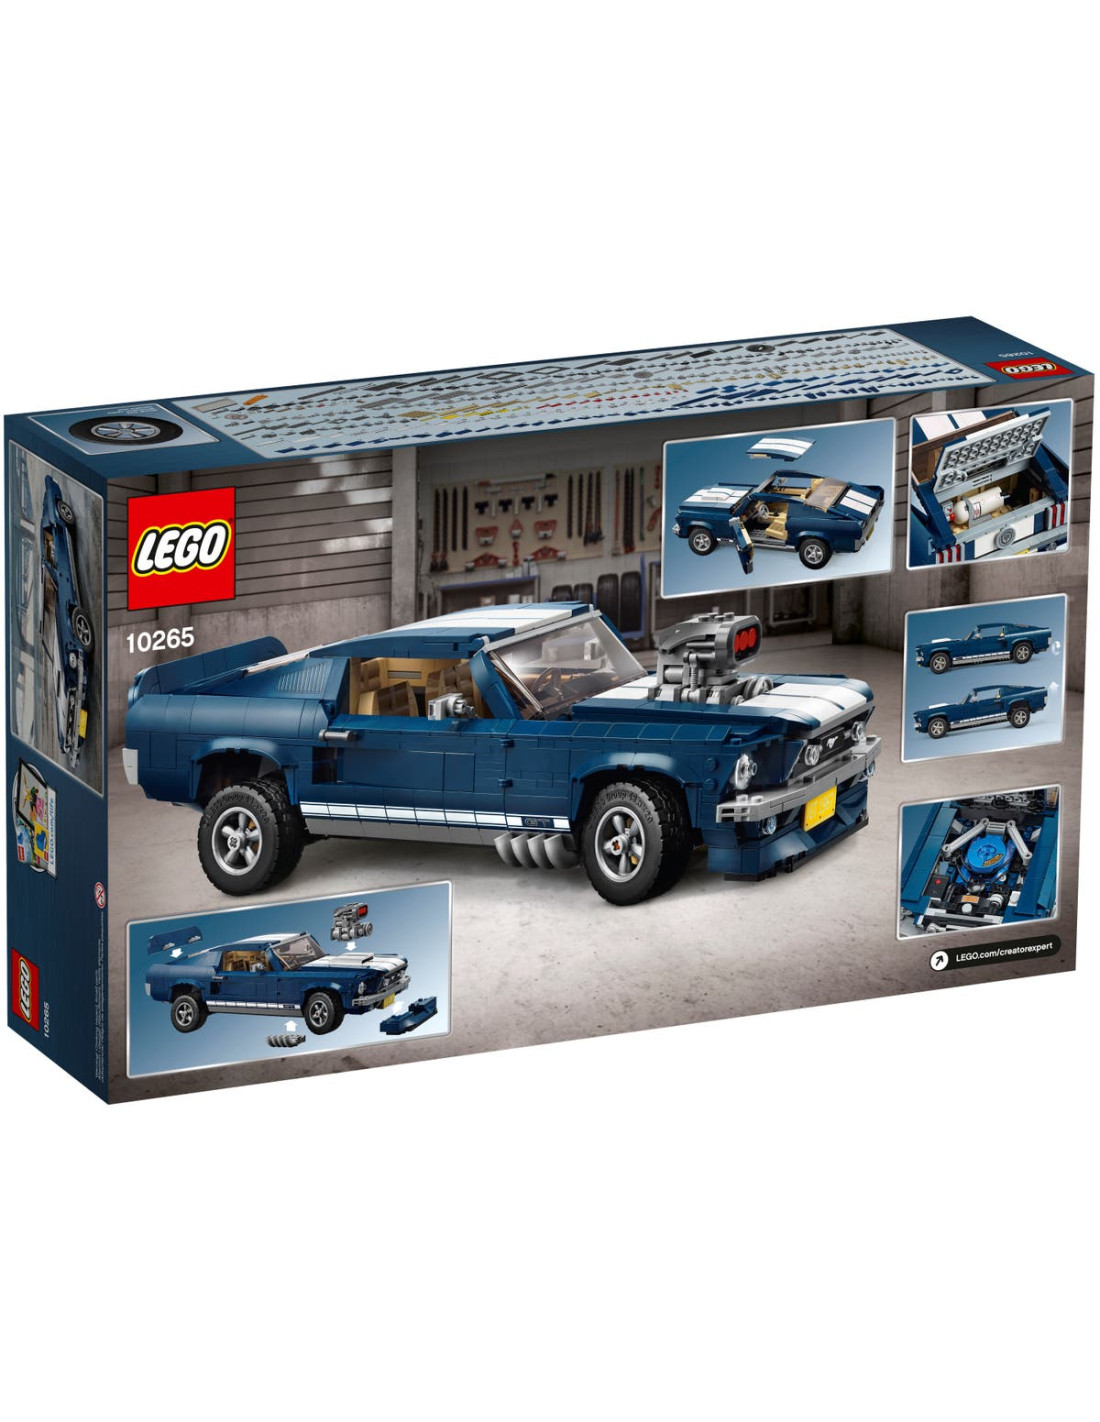 Ford Mustang - Creator Expert LEGO 10265